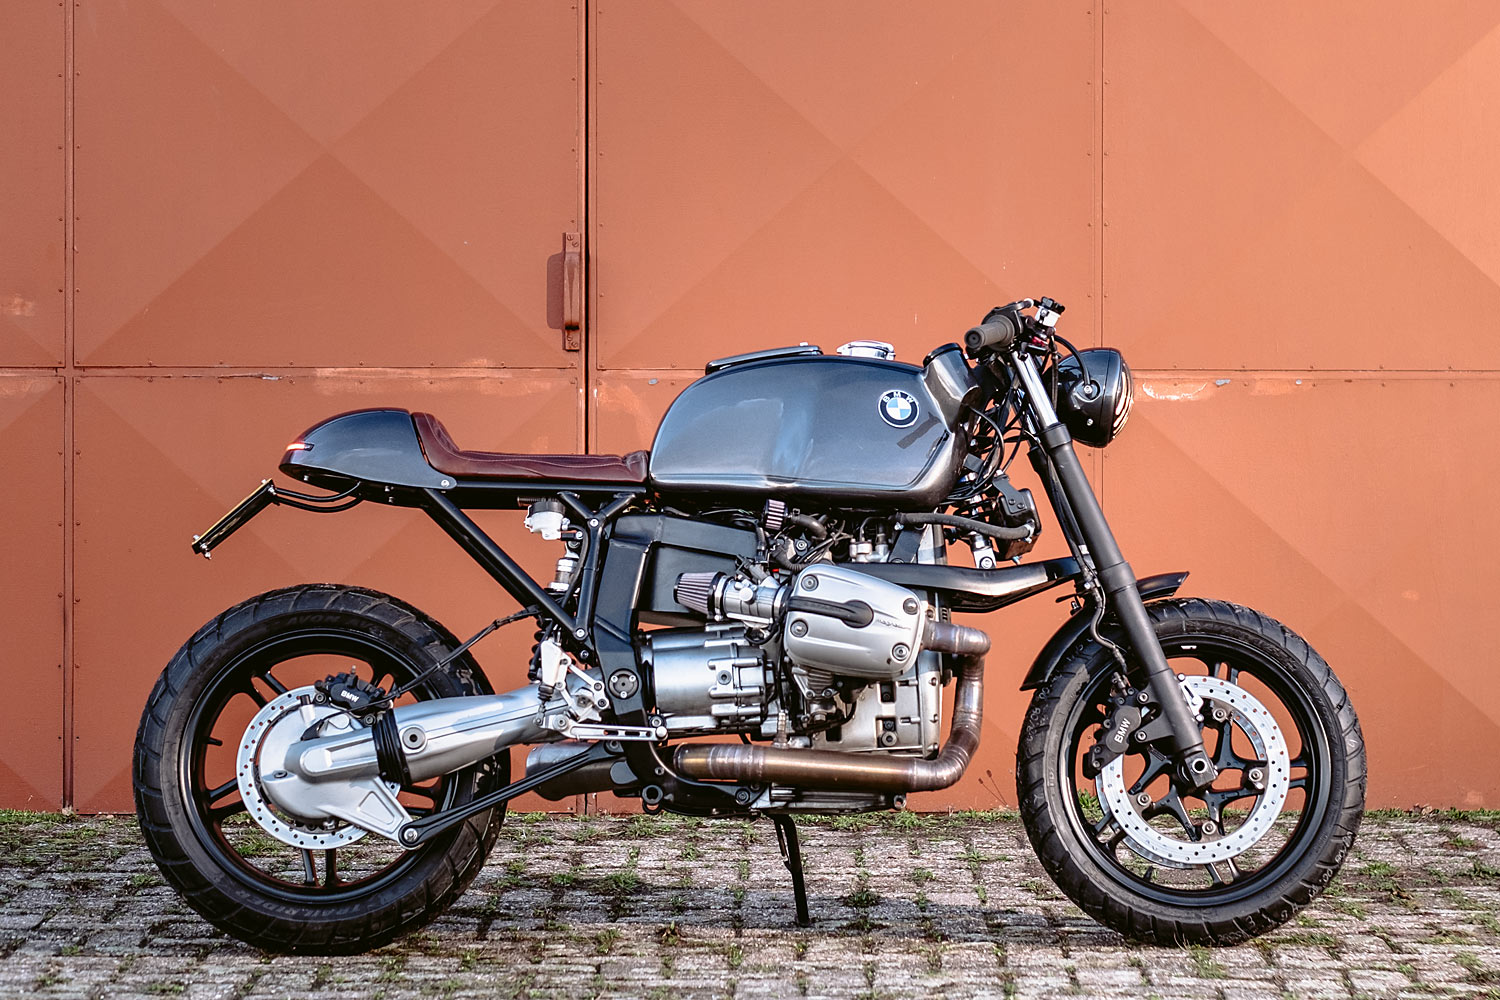 The Beast' Bmw R1100S Cafe Racer - Moto Adonis - Pipeburn